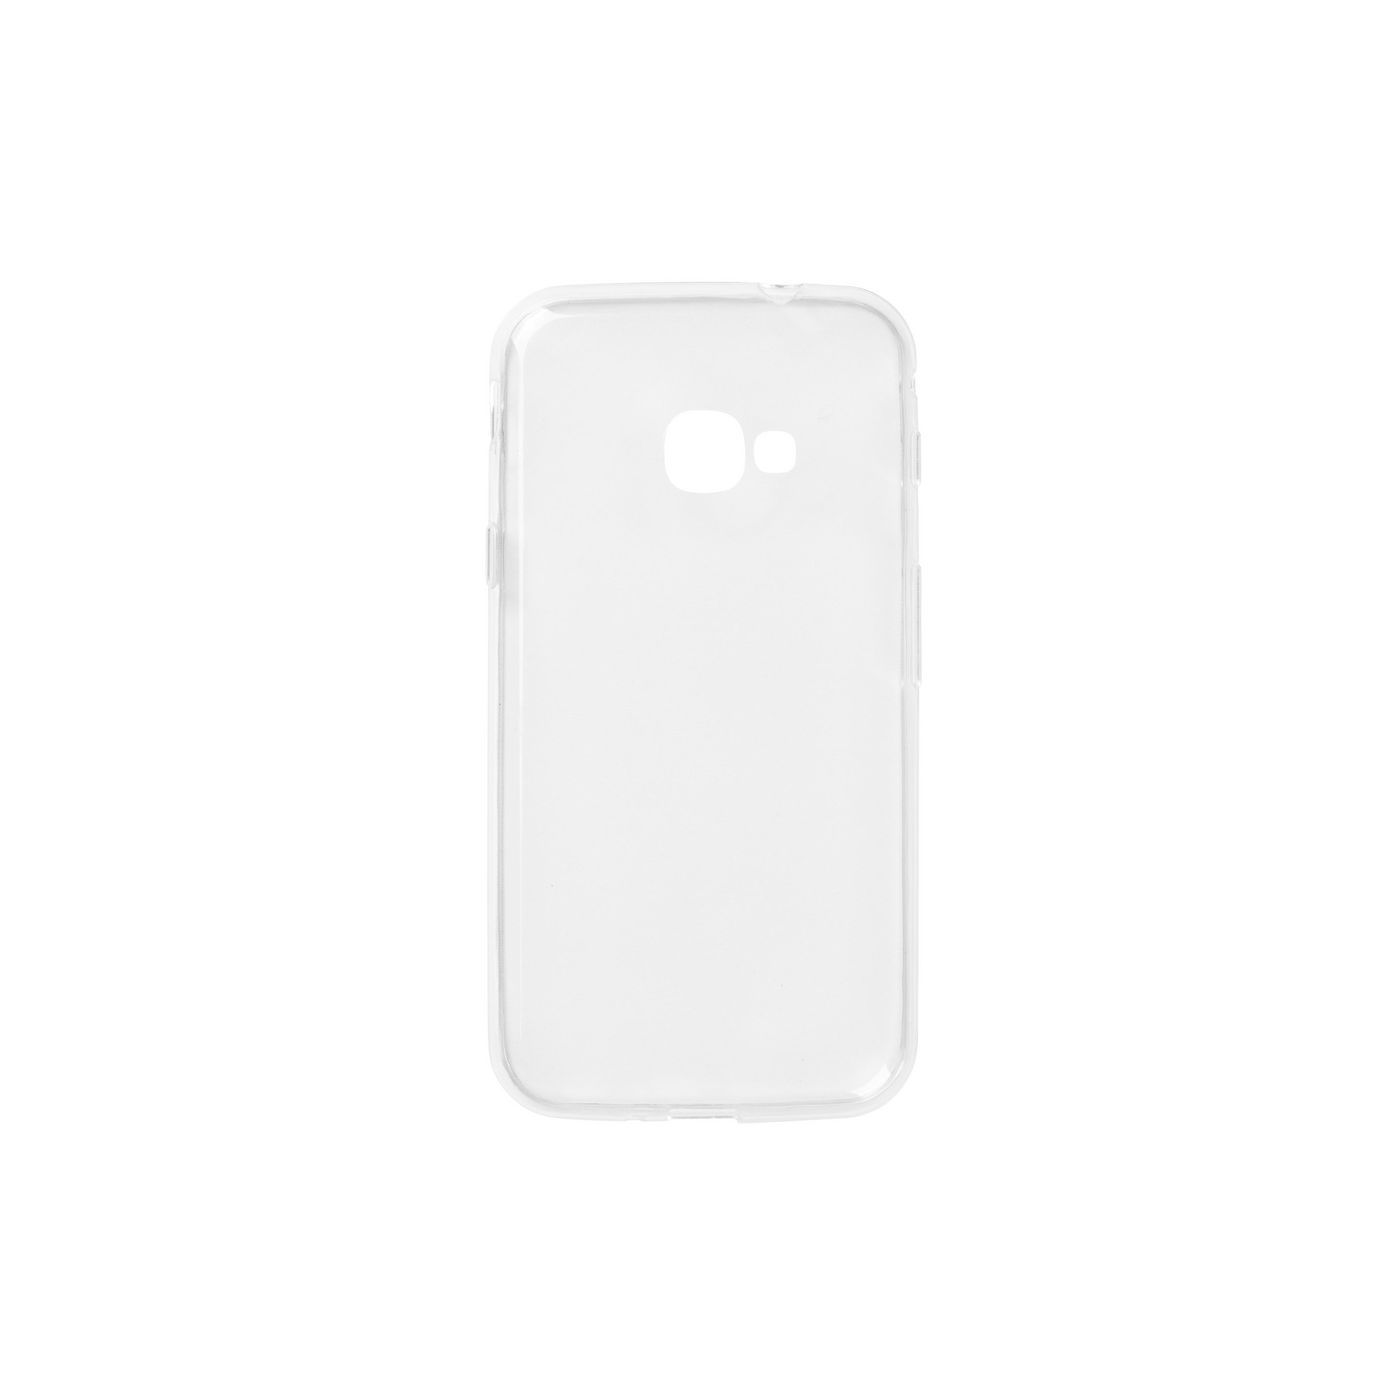 Galaxy Xcover 4/4s Soft Case Clear Ultra-slim